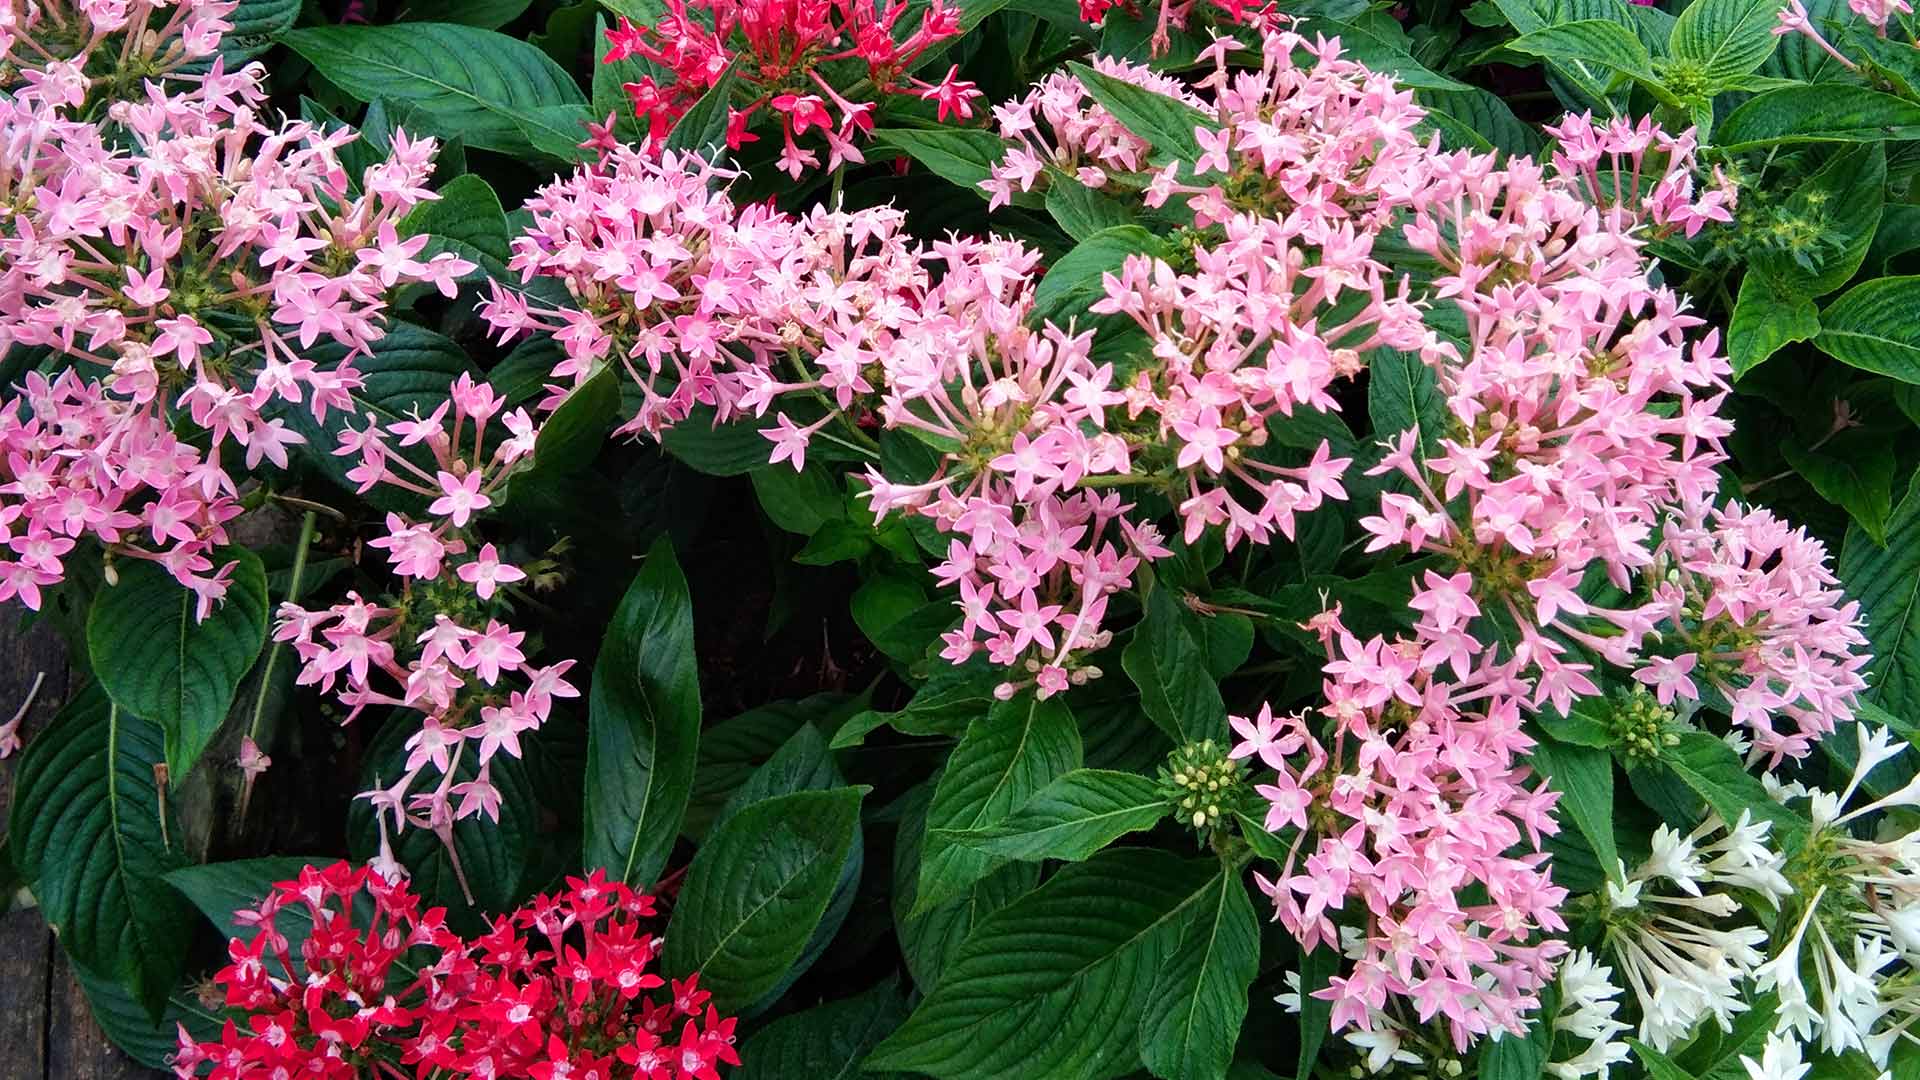 What’s the Difference Between Annual & Perennial Plants?